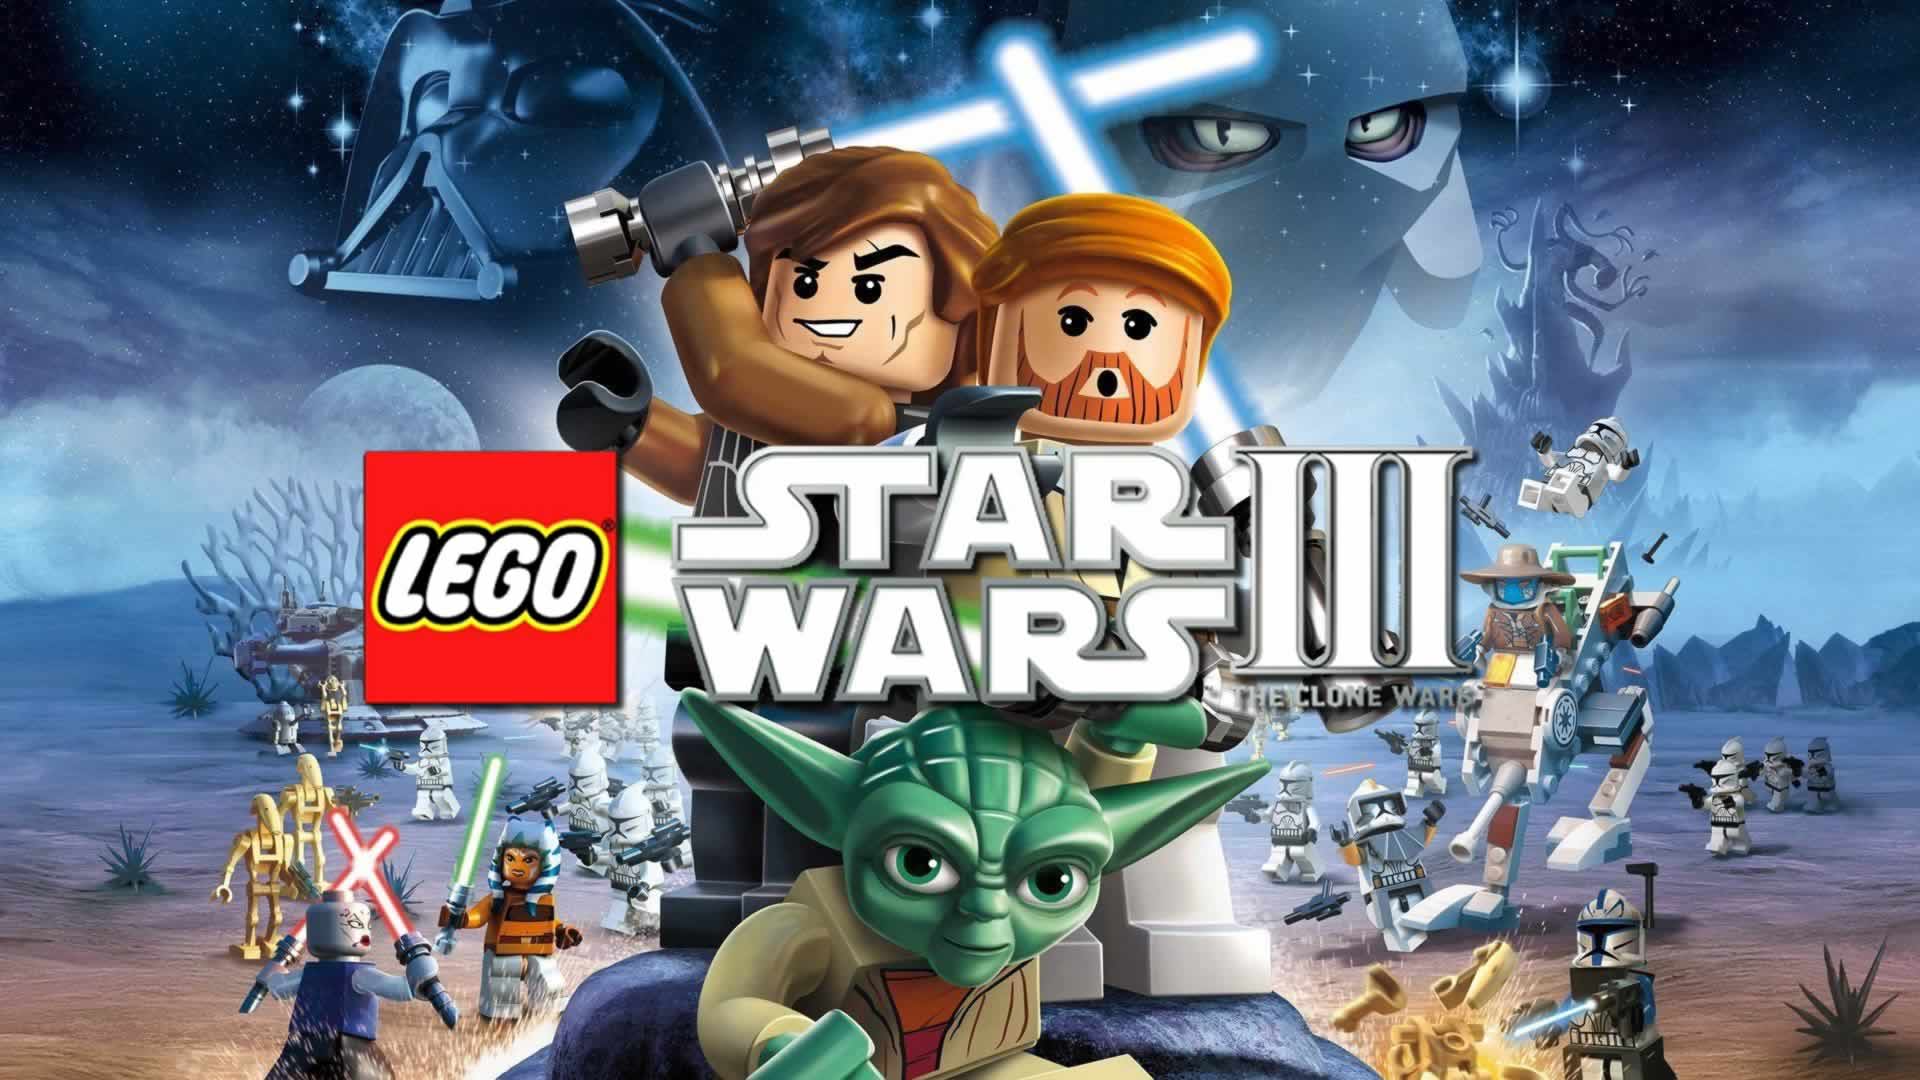 LEGO Star Wars 3: The Clone Wars Game Download